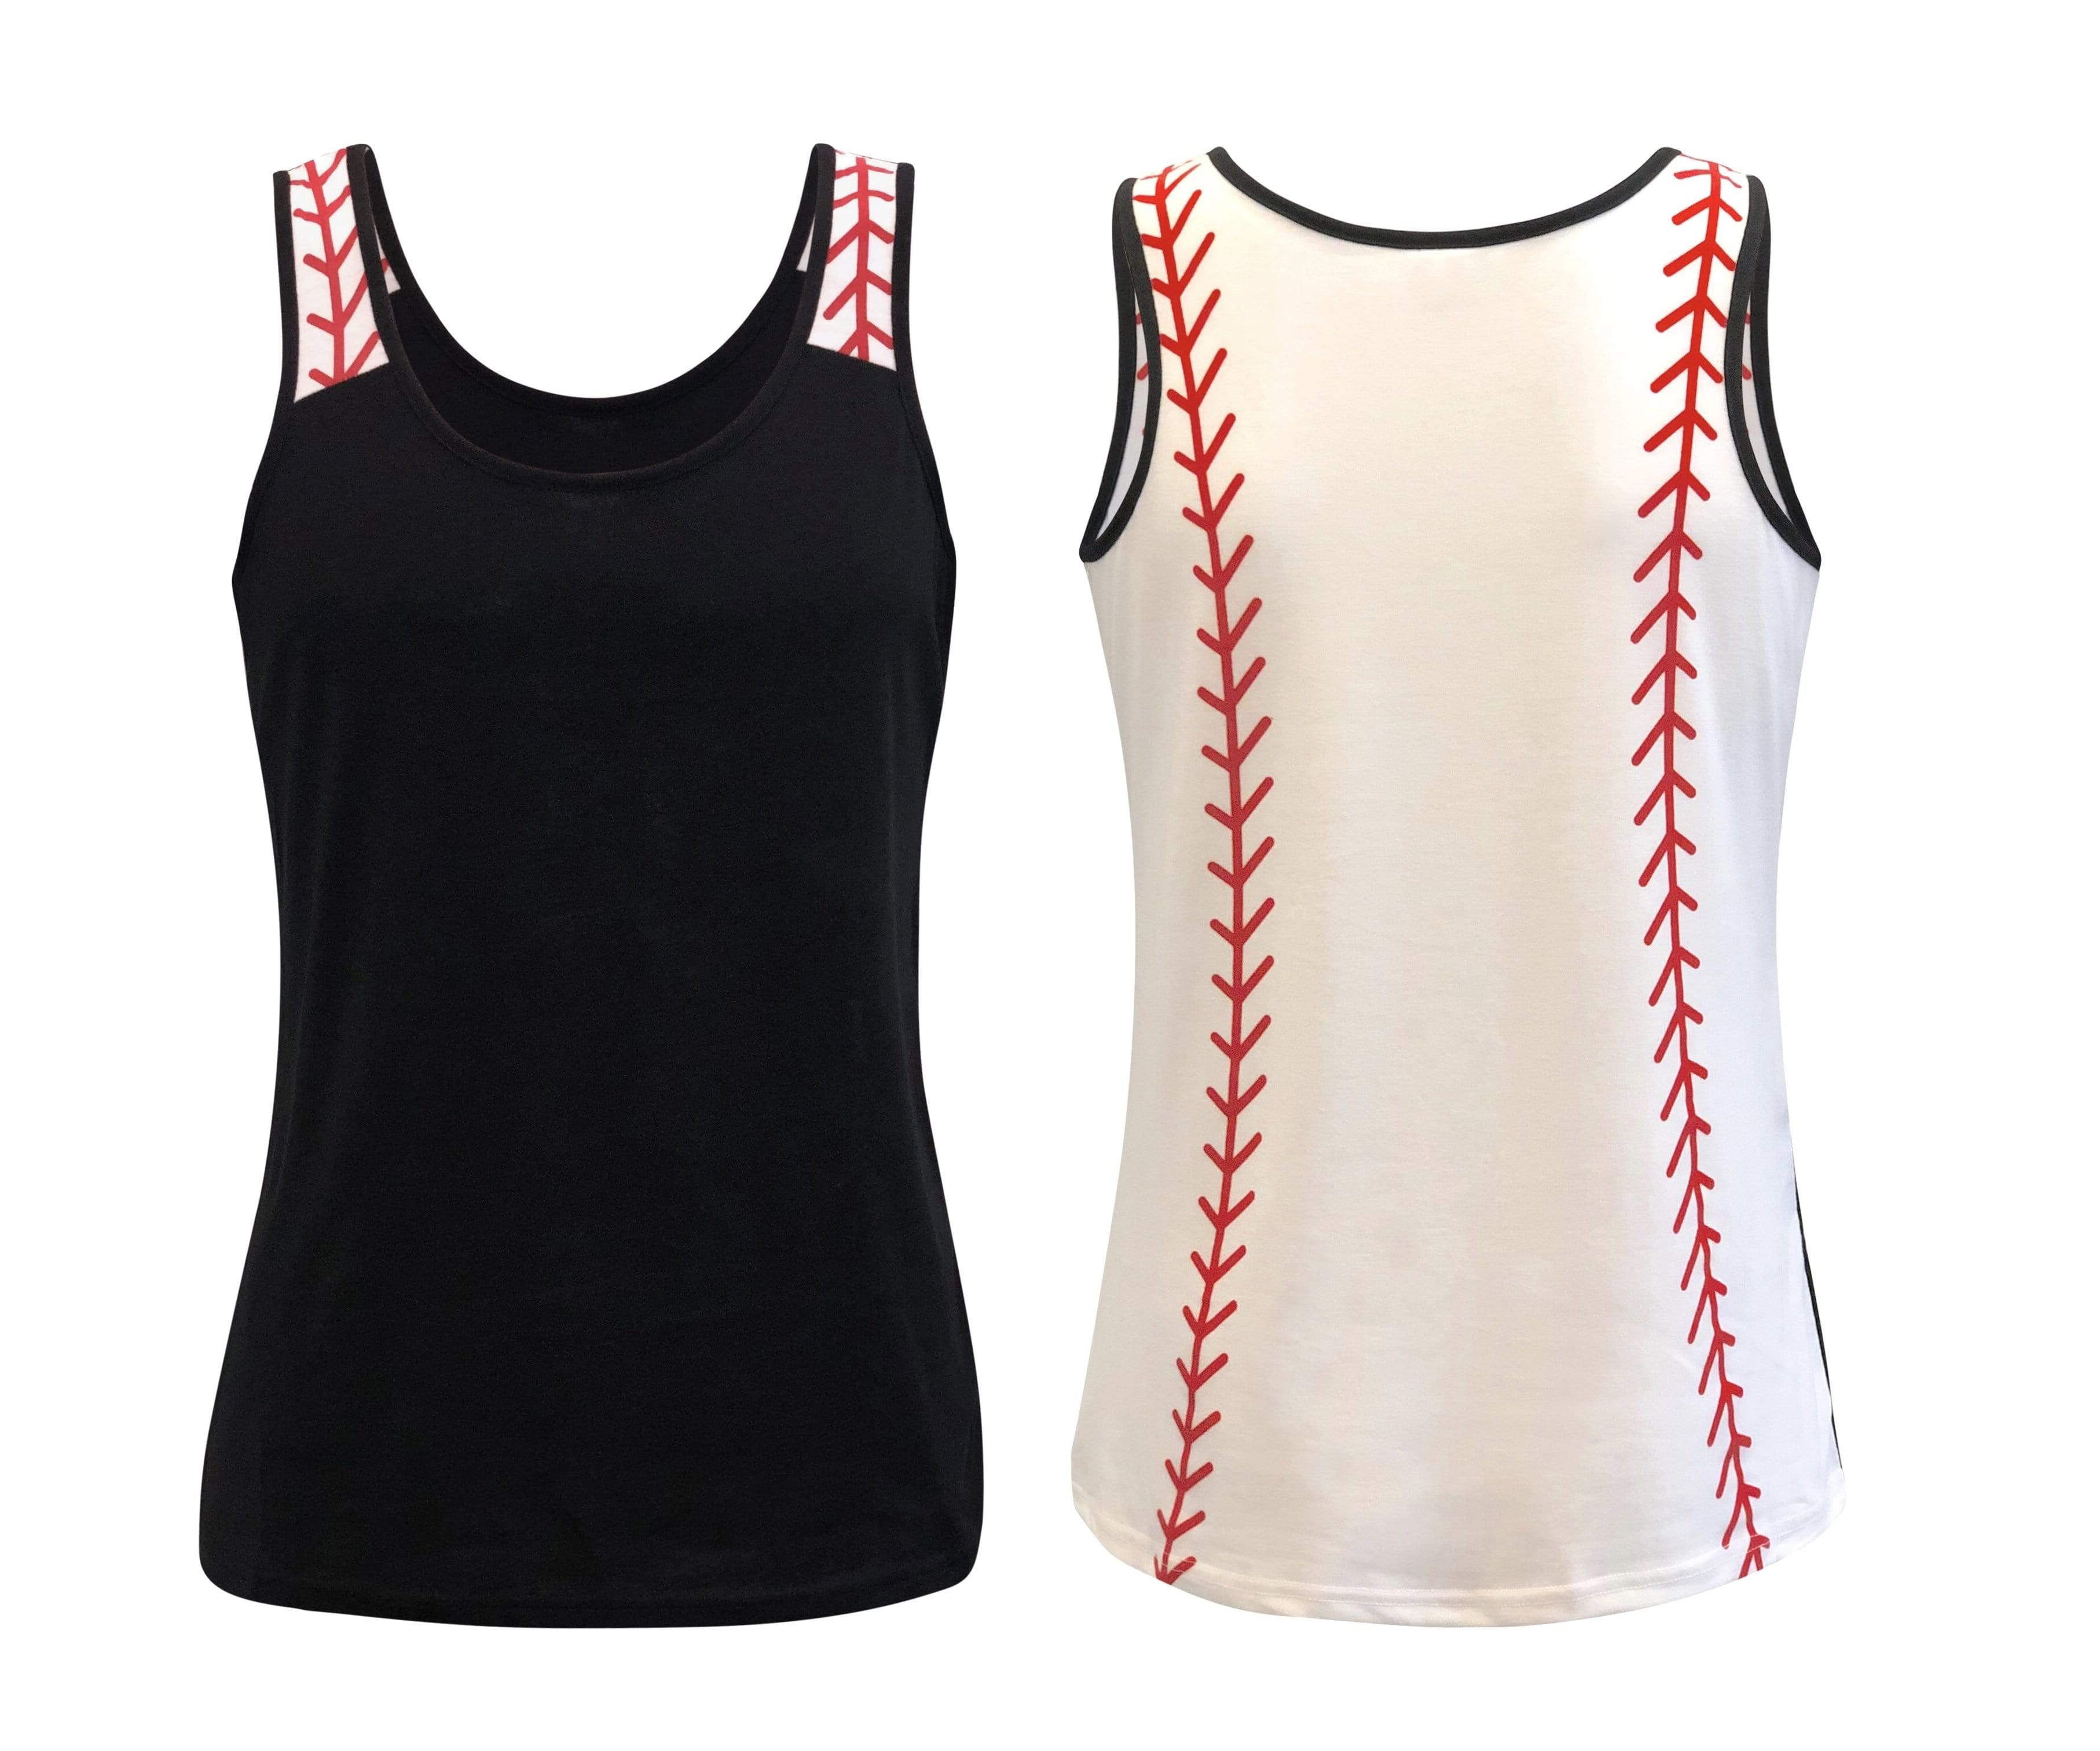 Plus Size Game Day Ladies Shirt, Women's Cute Baseball Graphic Tank Tops  Crew Neck Tunic Sleeveless Blouse Tees Summer(Black,Small) at   Women's Clothing store